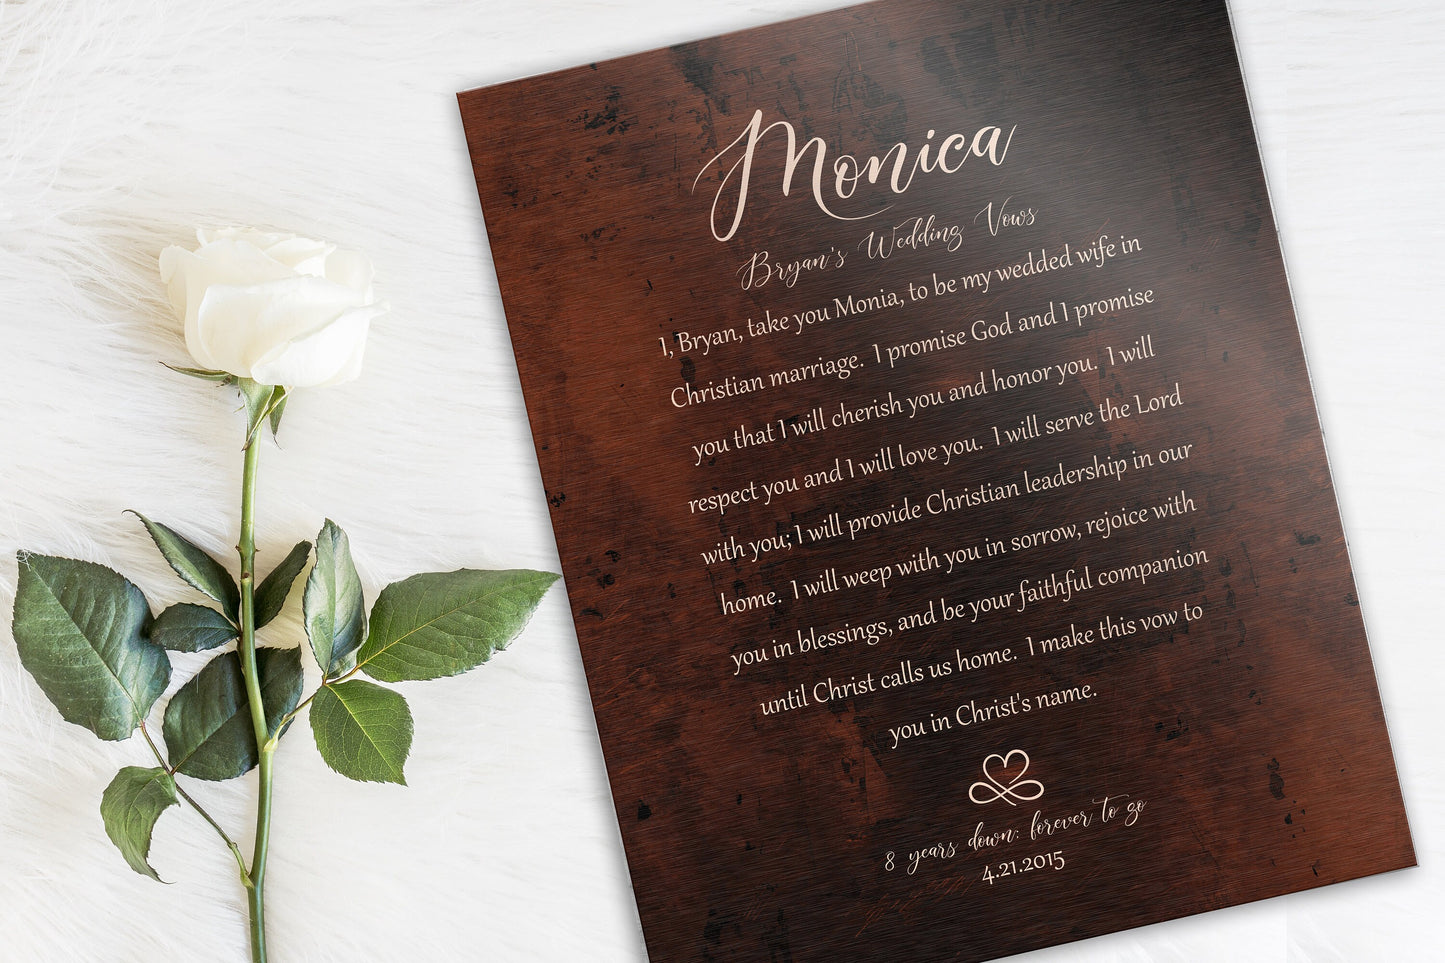 Our Wedding Vows on Bronze, Custom Wedding Vow Art, Bronze Gift, Bronze Gift for her, Men Bronze Gift, Anniversary Gift for him, Vows Print